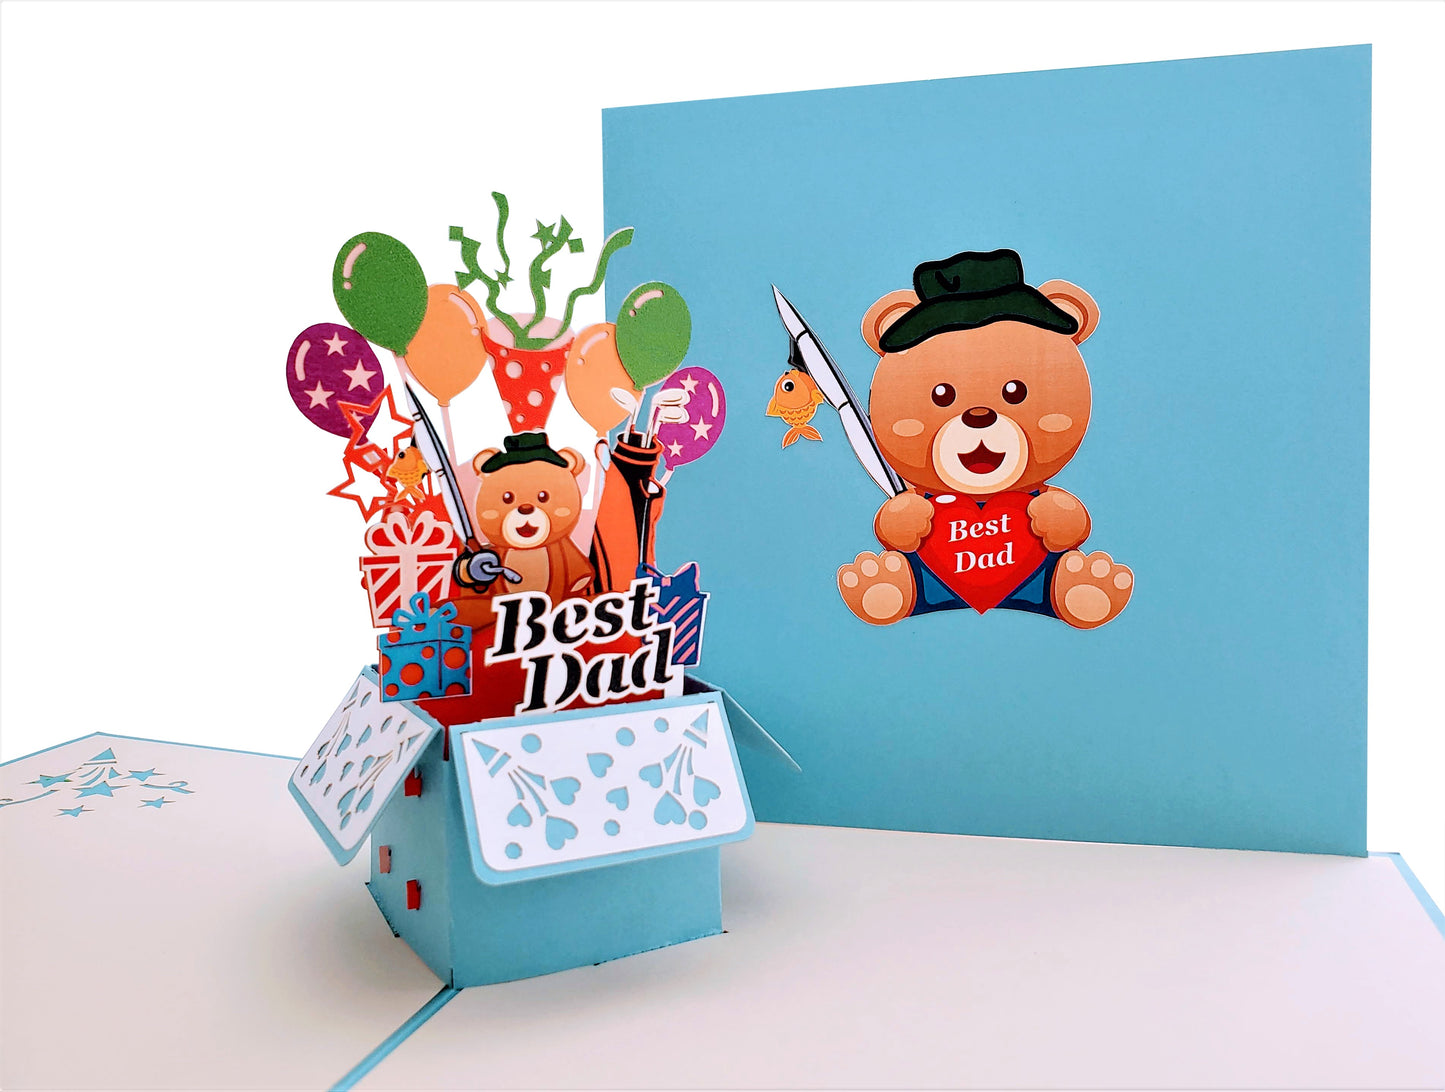 Best Dad Gift Box 3D Pop Up Greeting Card - best deal - Father's Day - Special Days - iGifts And Cards